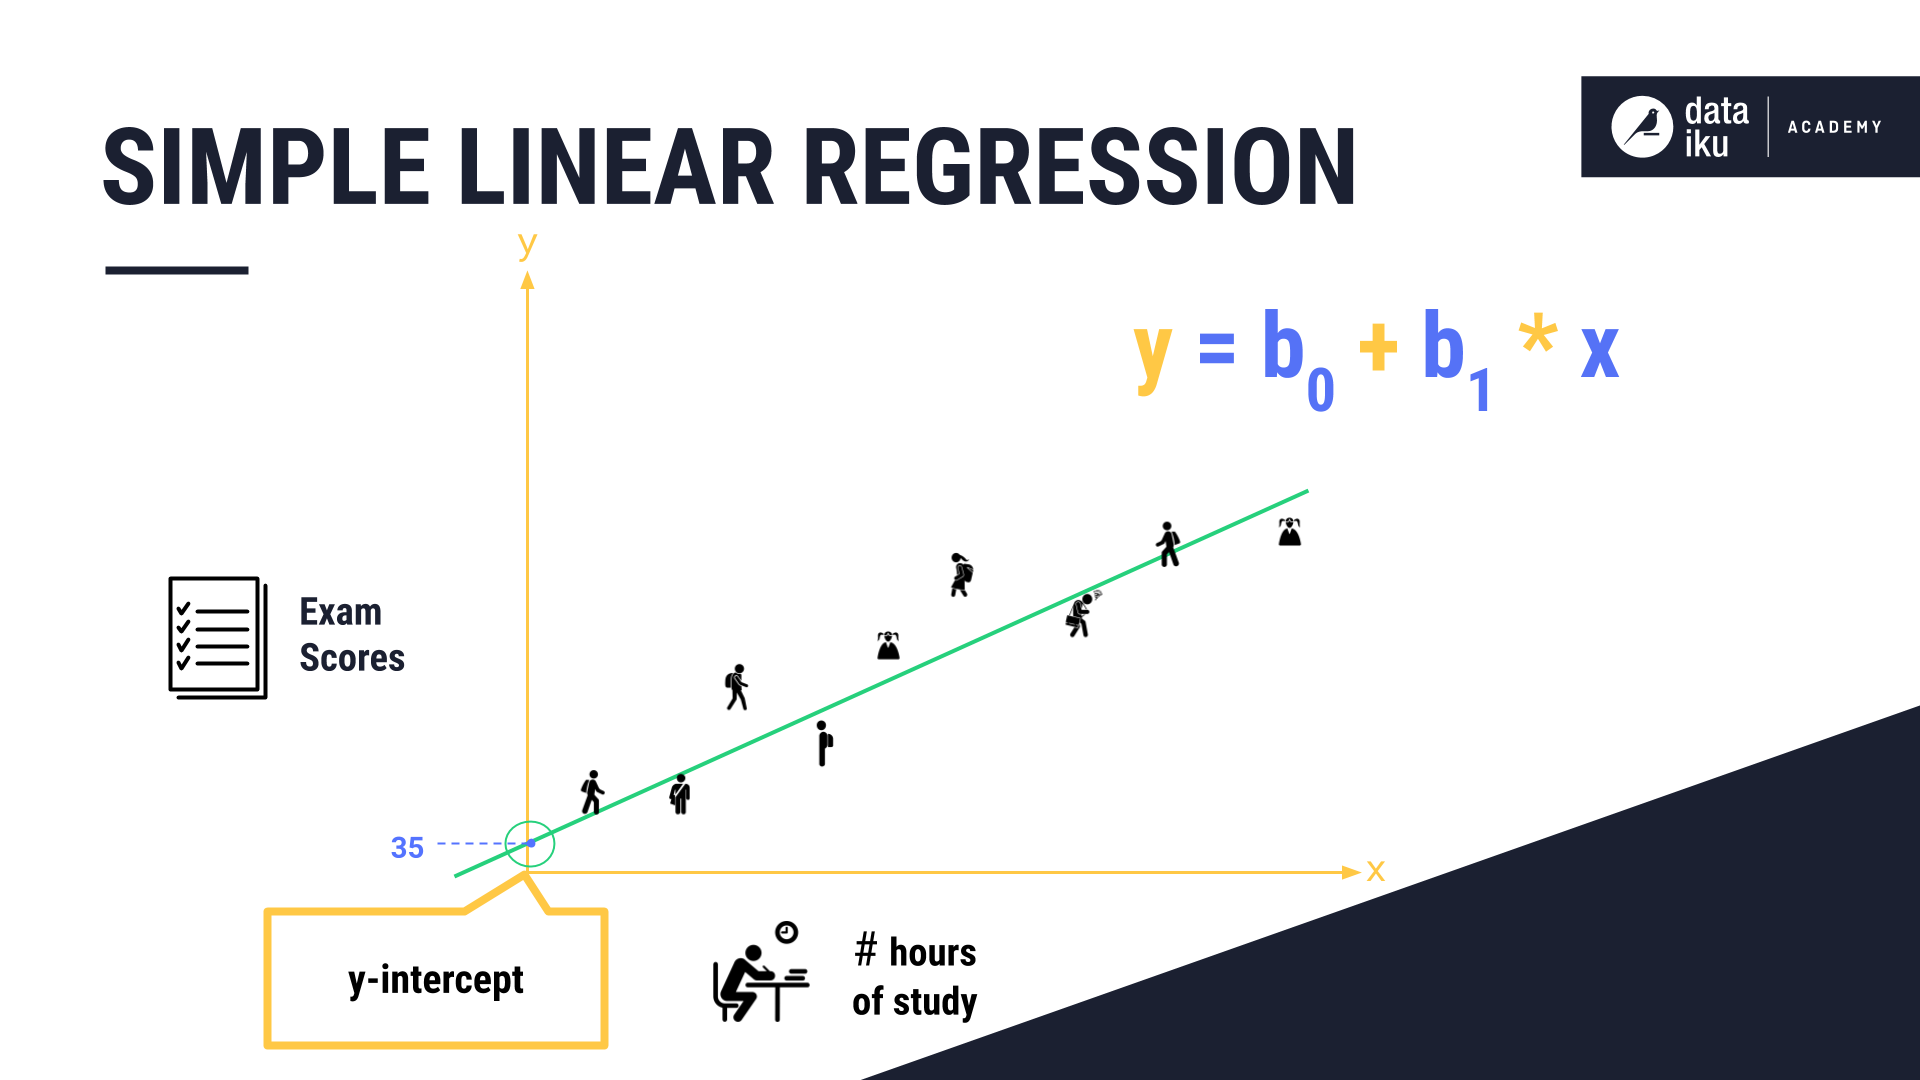 ../../_images/simple-linear-regression1.png